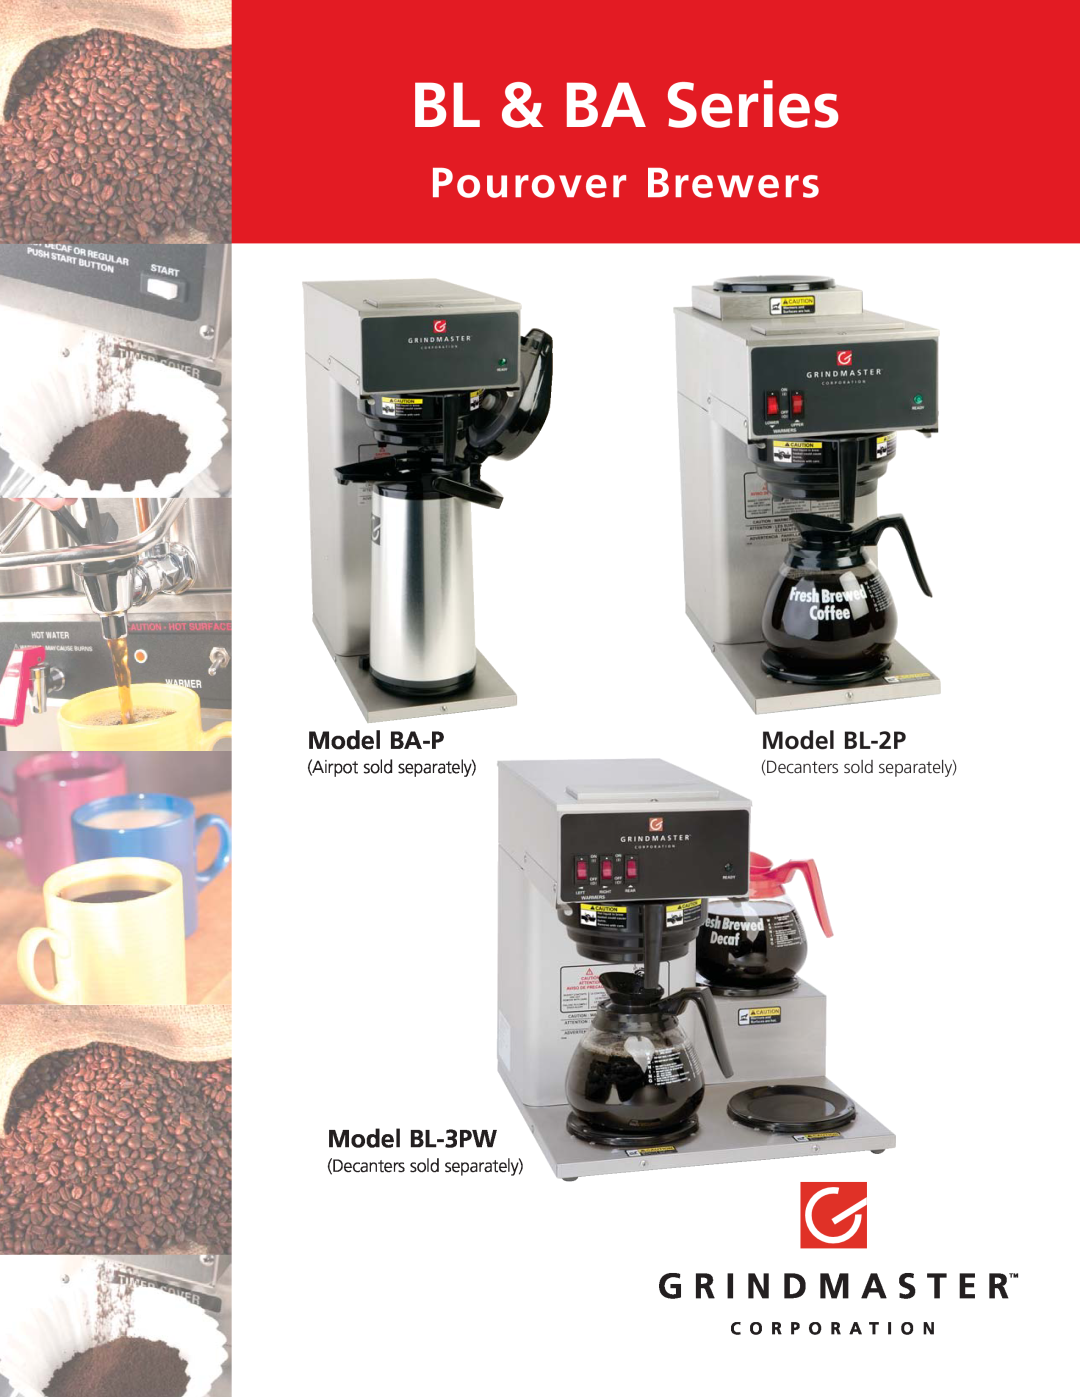 Grindmaster manual BL & BA Series, Pourover Brewers, Model BA-P, Model BL-2P, Model BL-3PW, Airpot sold separately 